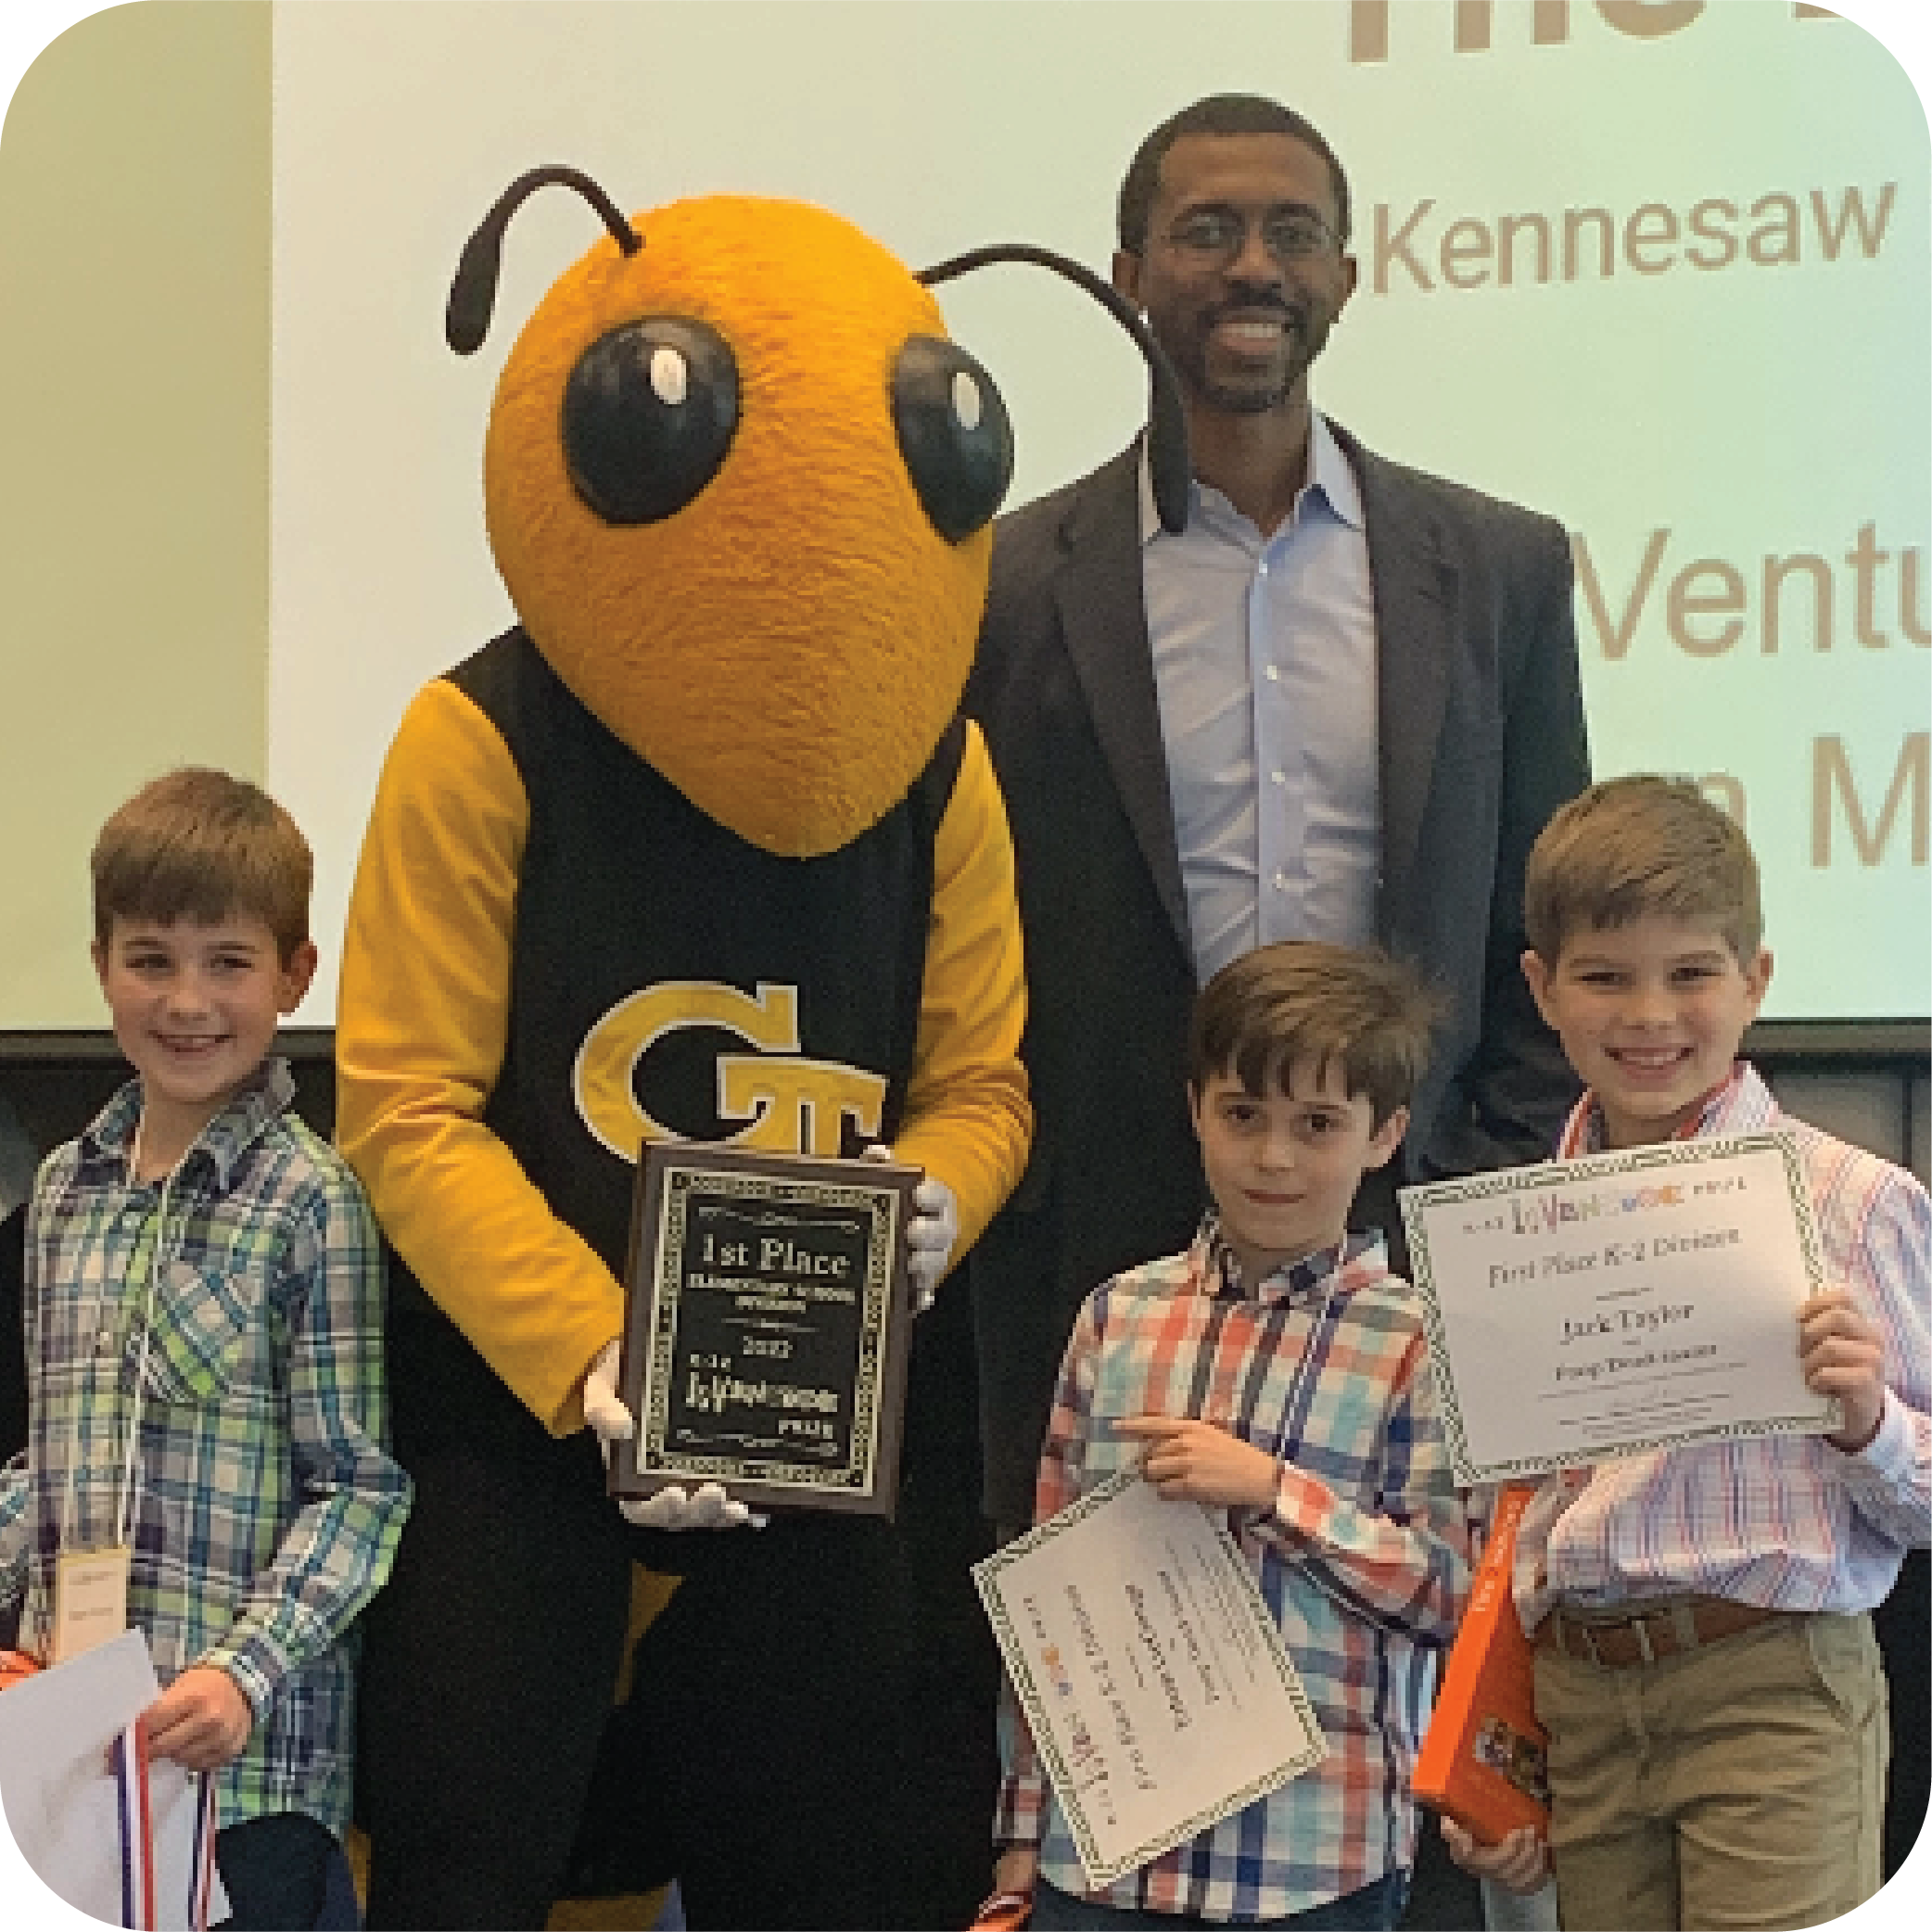 Three smiling students holding prizes and standing next to Buzz (Georgia Tech's yellowjacket mascot) holding a plaque and Craig Cupid (Georgia Intellectual Property and Alliance representative).